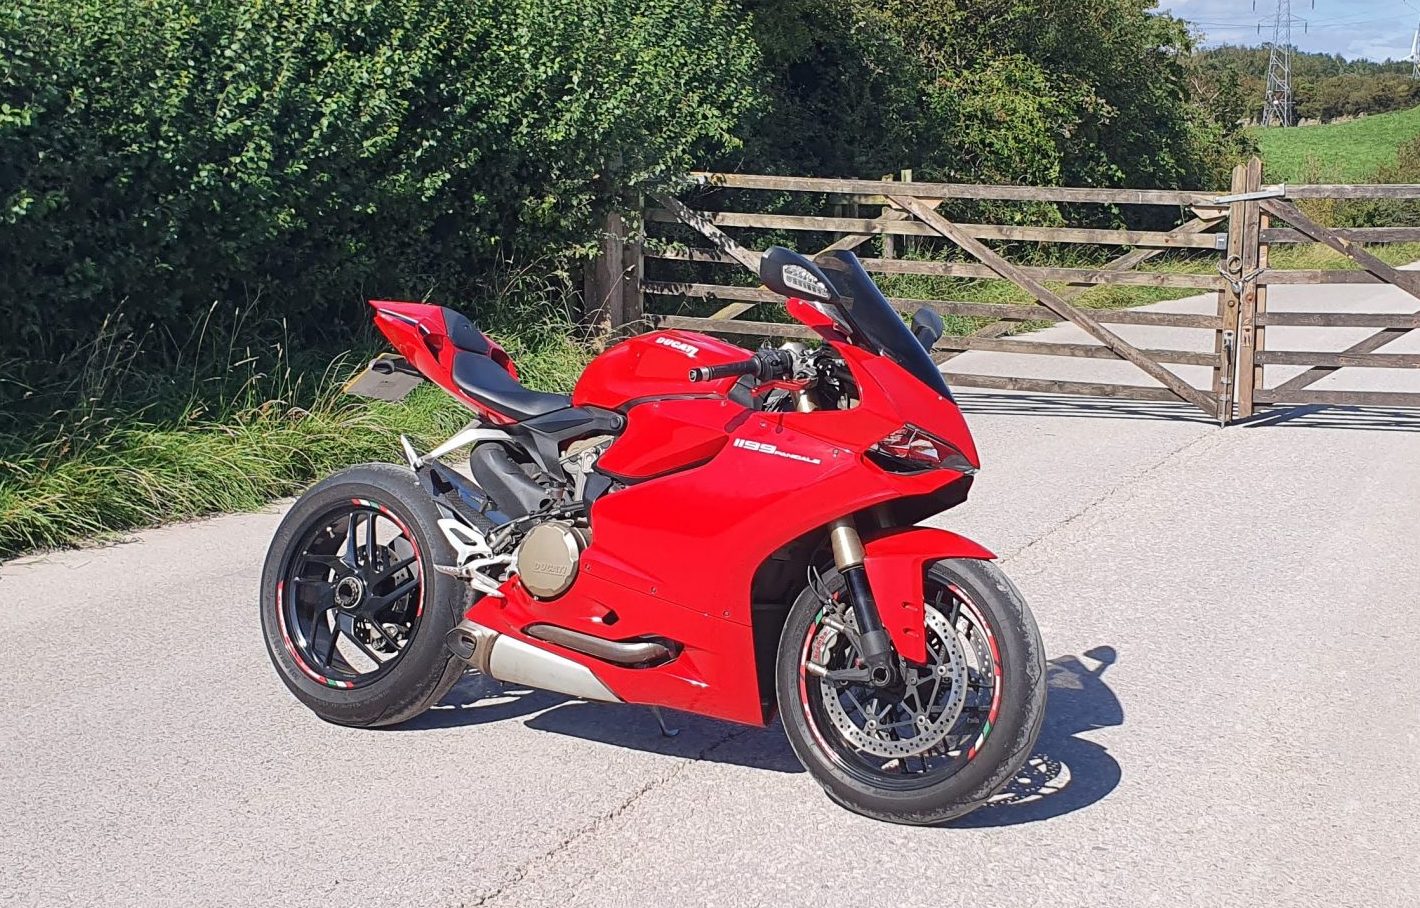 Used Bike Review: Ducati 1199 Panigale